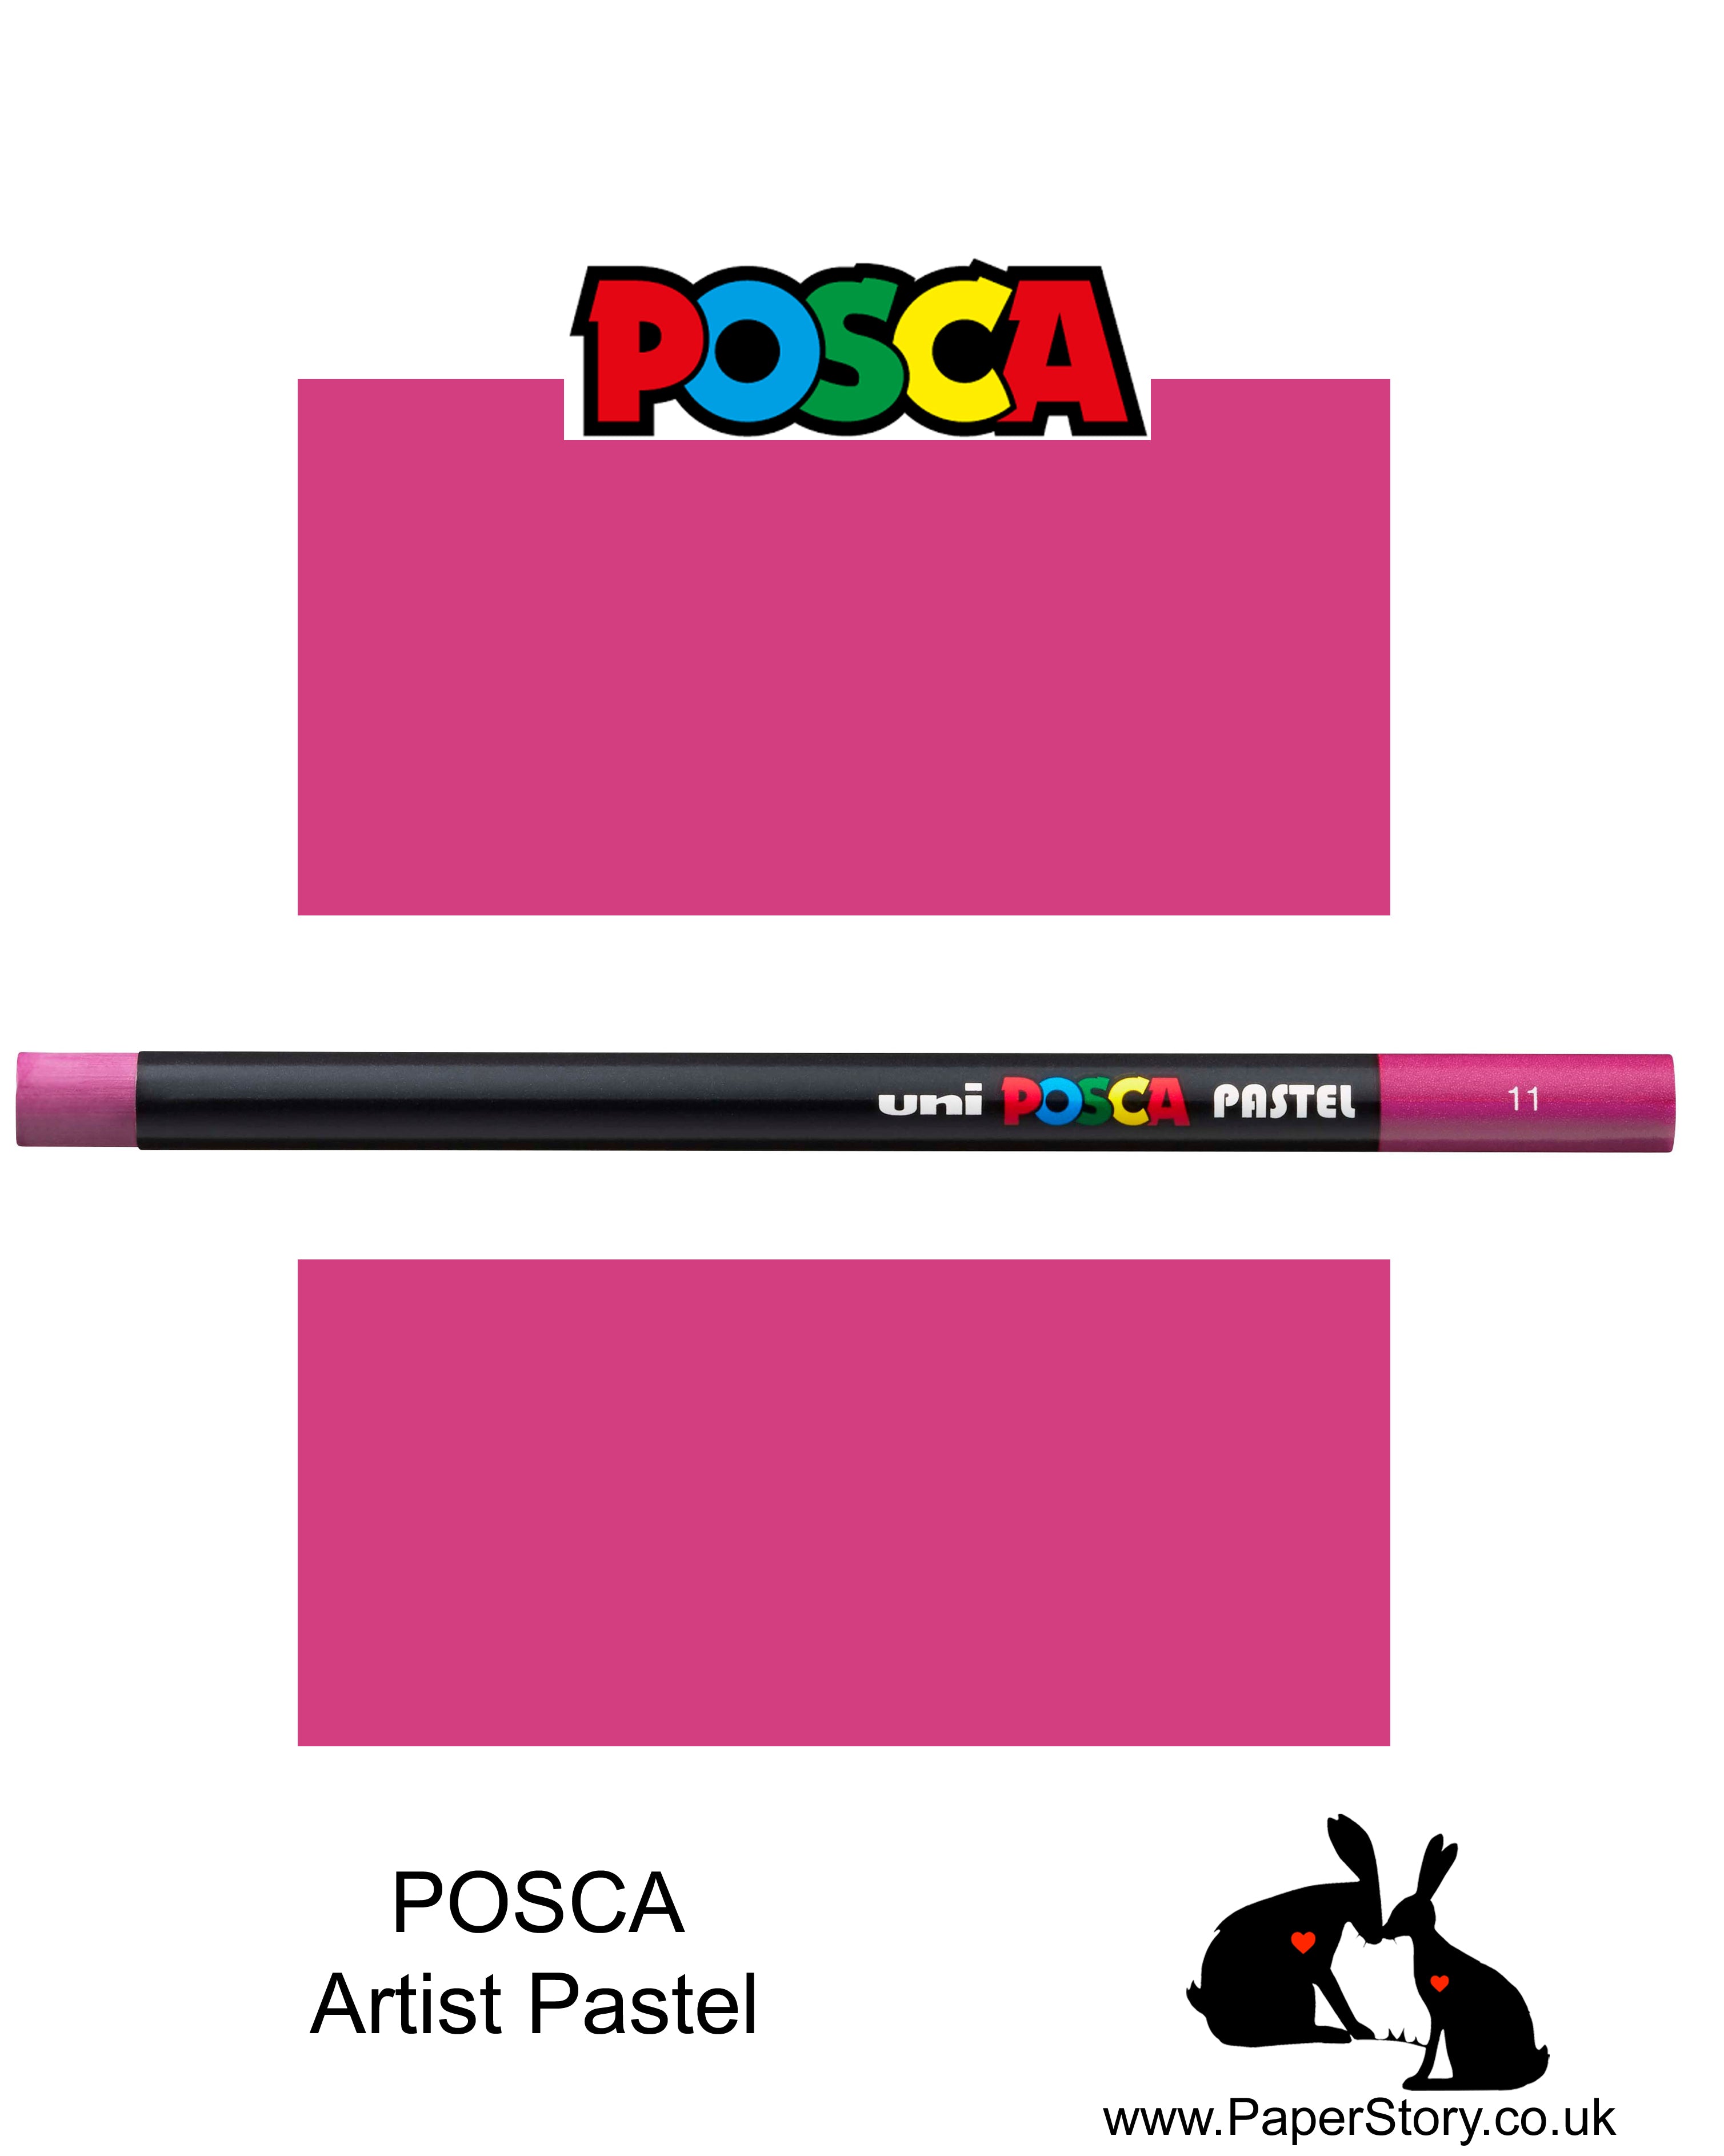 New Uni POSCA Pastels, Fuchsia pink, these  new style wax and oil mixed pastel colours can be blended and overlaid, you can stipple, colour block, cross-hatch, scratch and outline. You can heat the sticks to create textured effects.